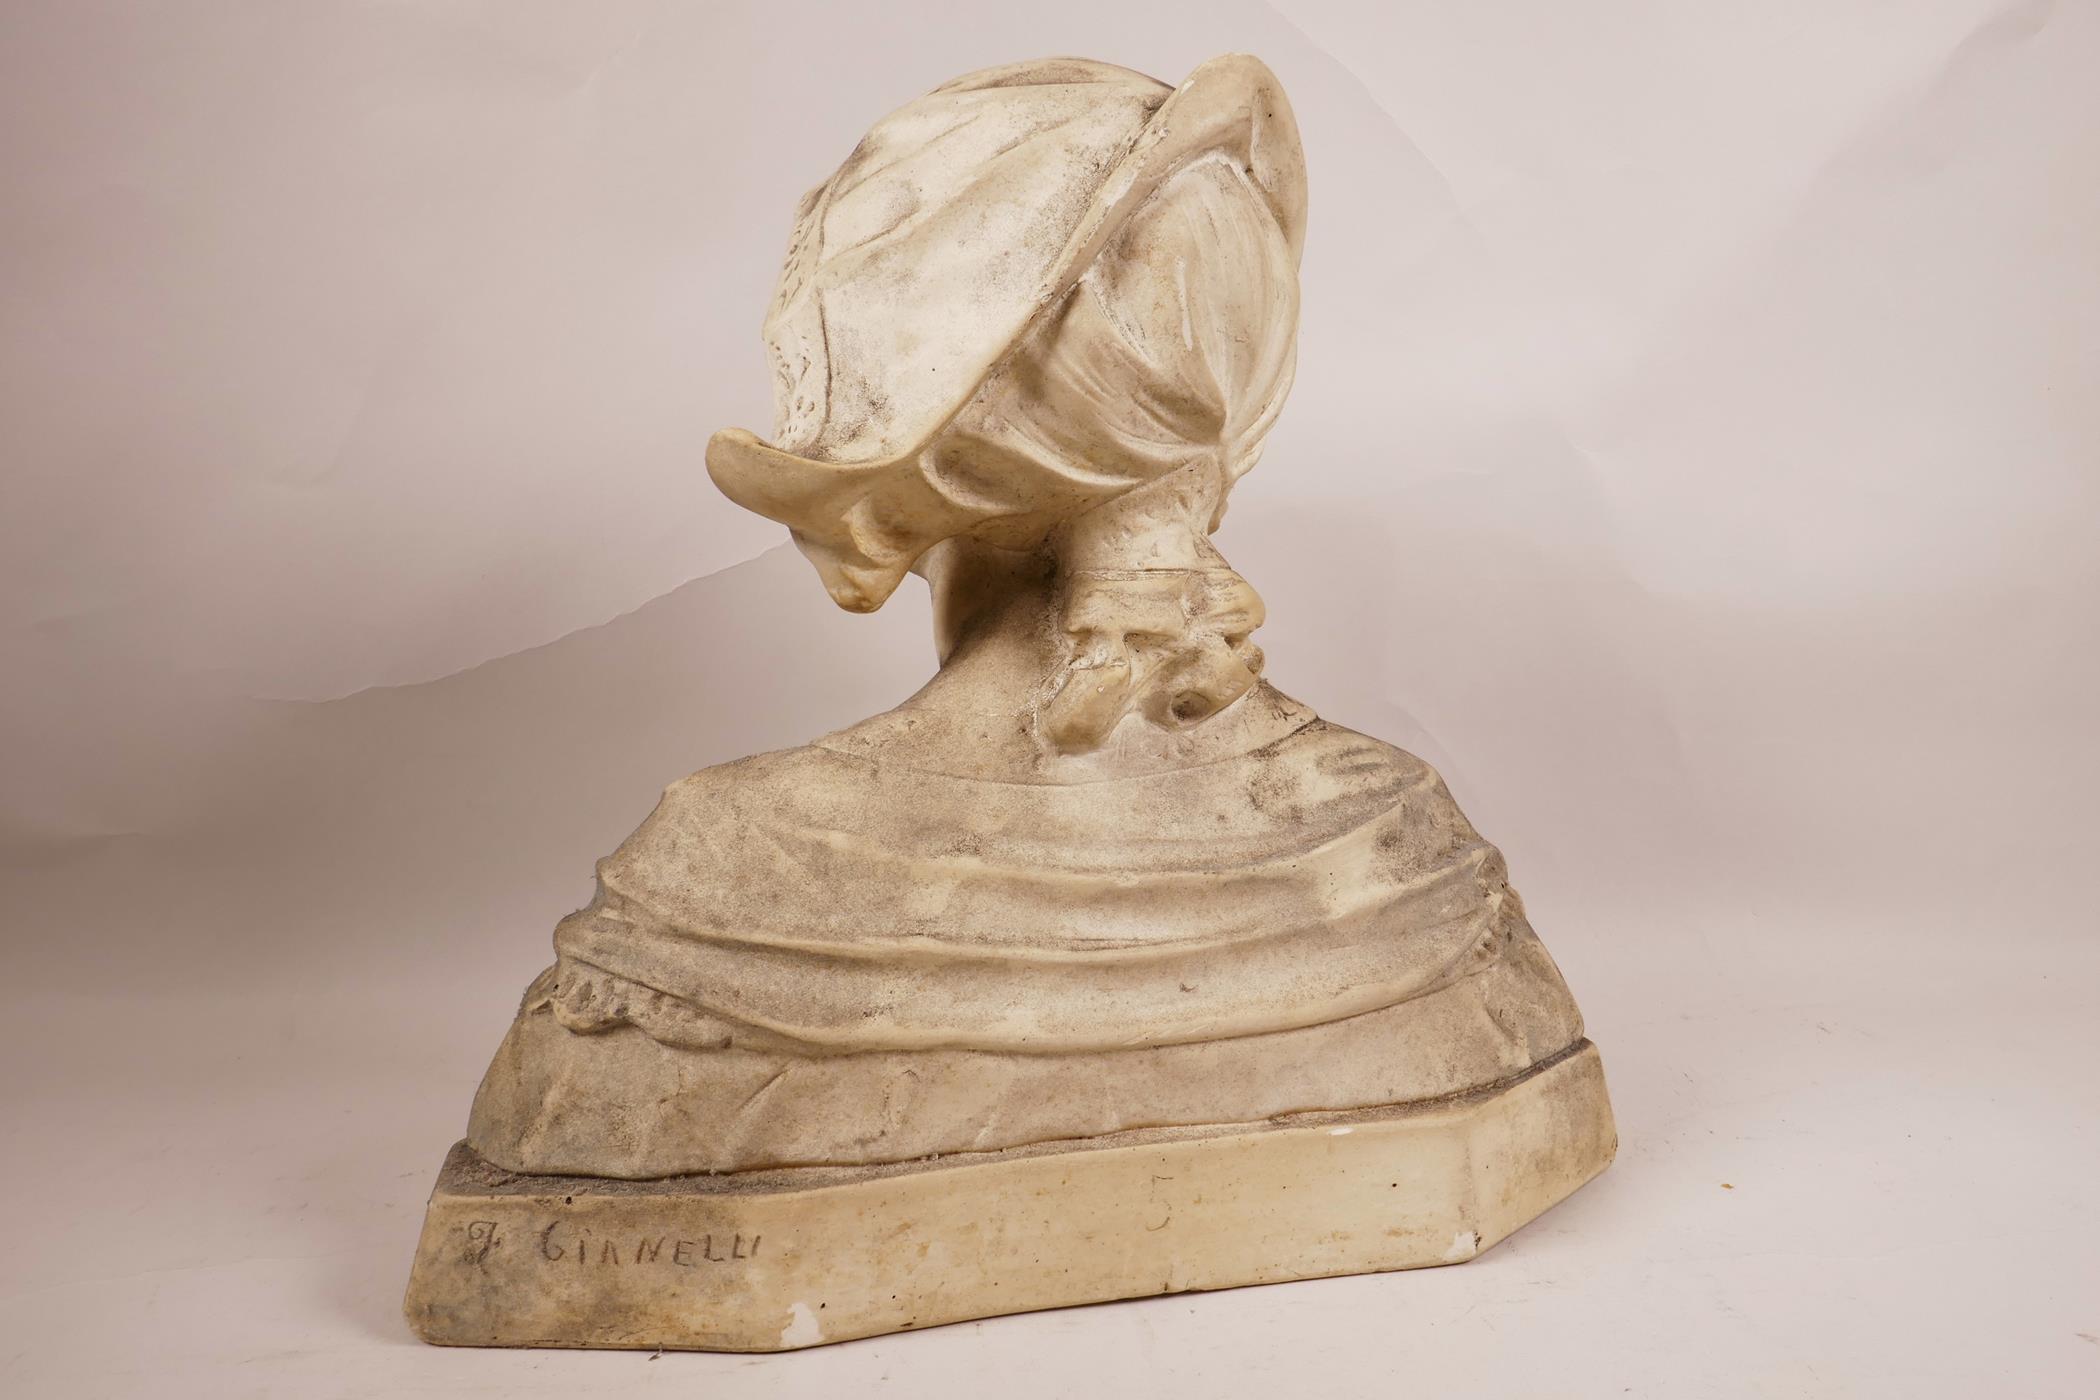 A C19th decorative bust of a Dutch lady in traditional dress, signed J. Gianelli, plaster cast, - Image 3 of 5